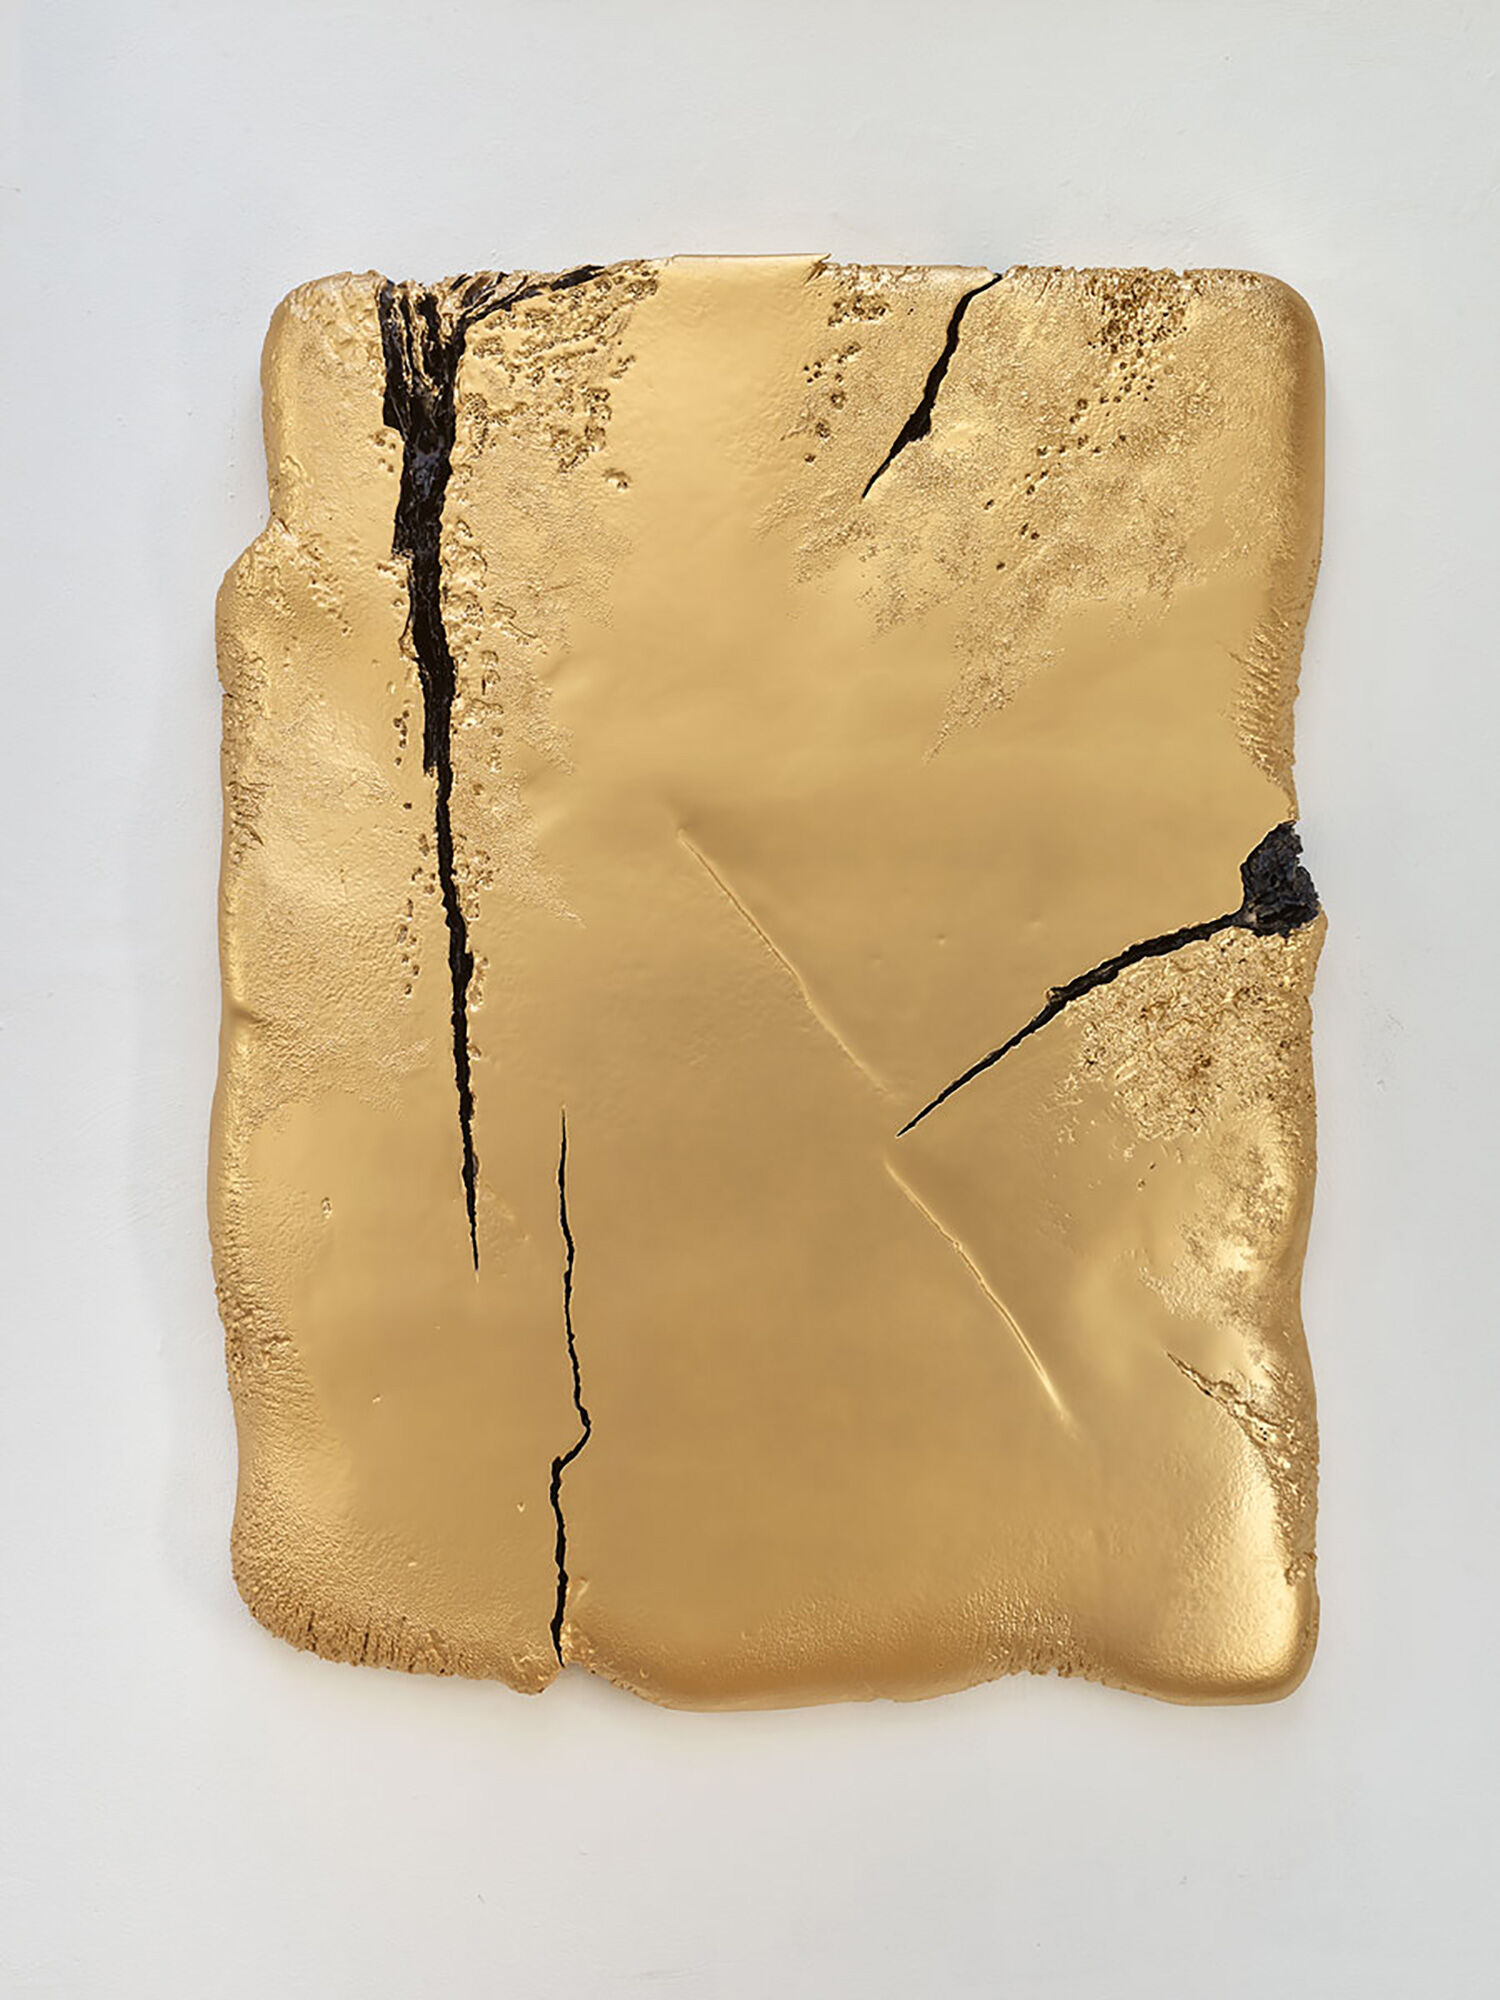 Wall object " Light Fissures #1" (2019) by Ulrike Buhl